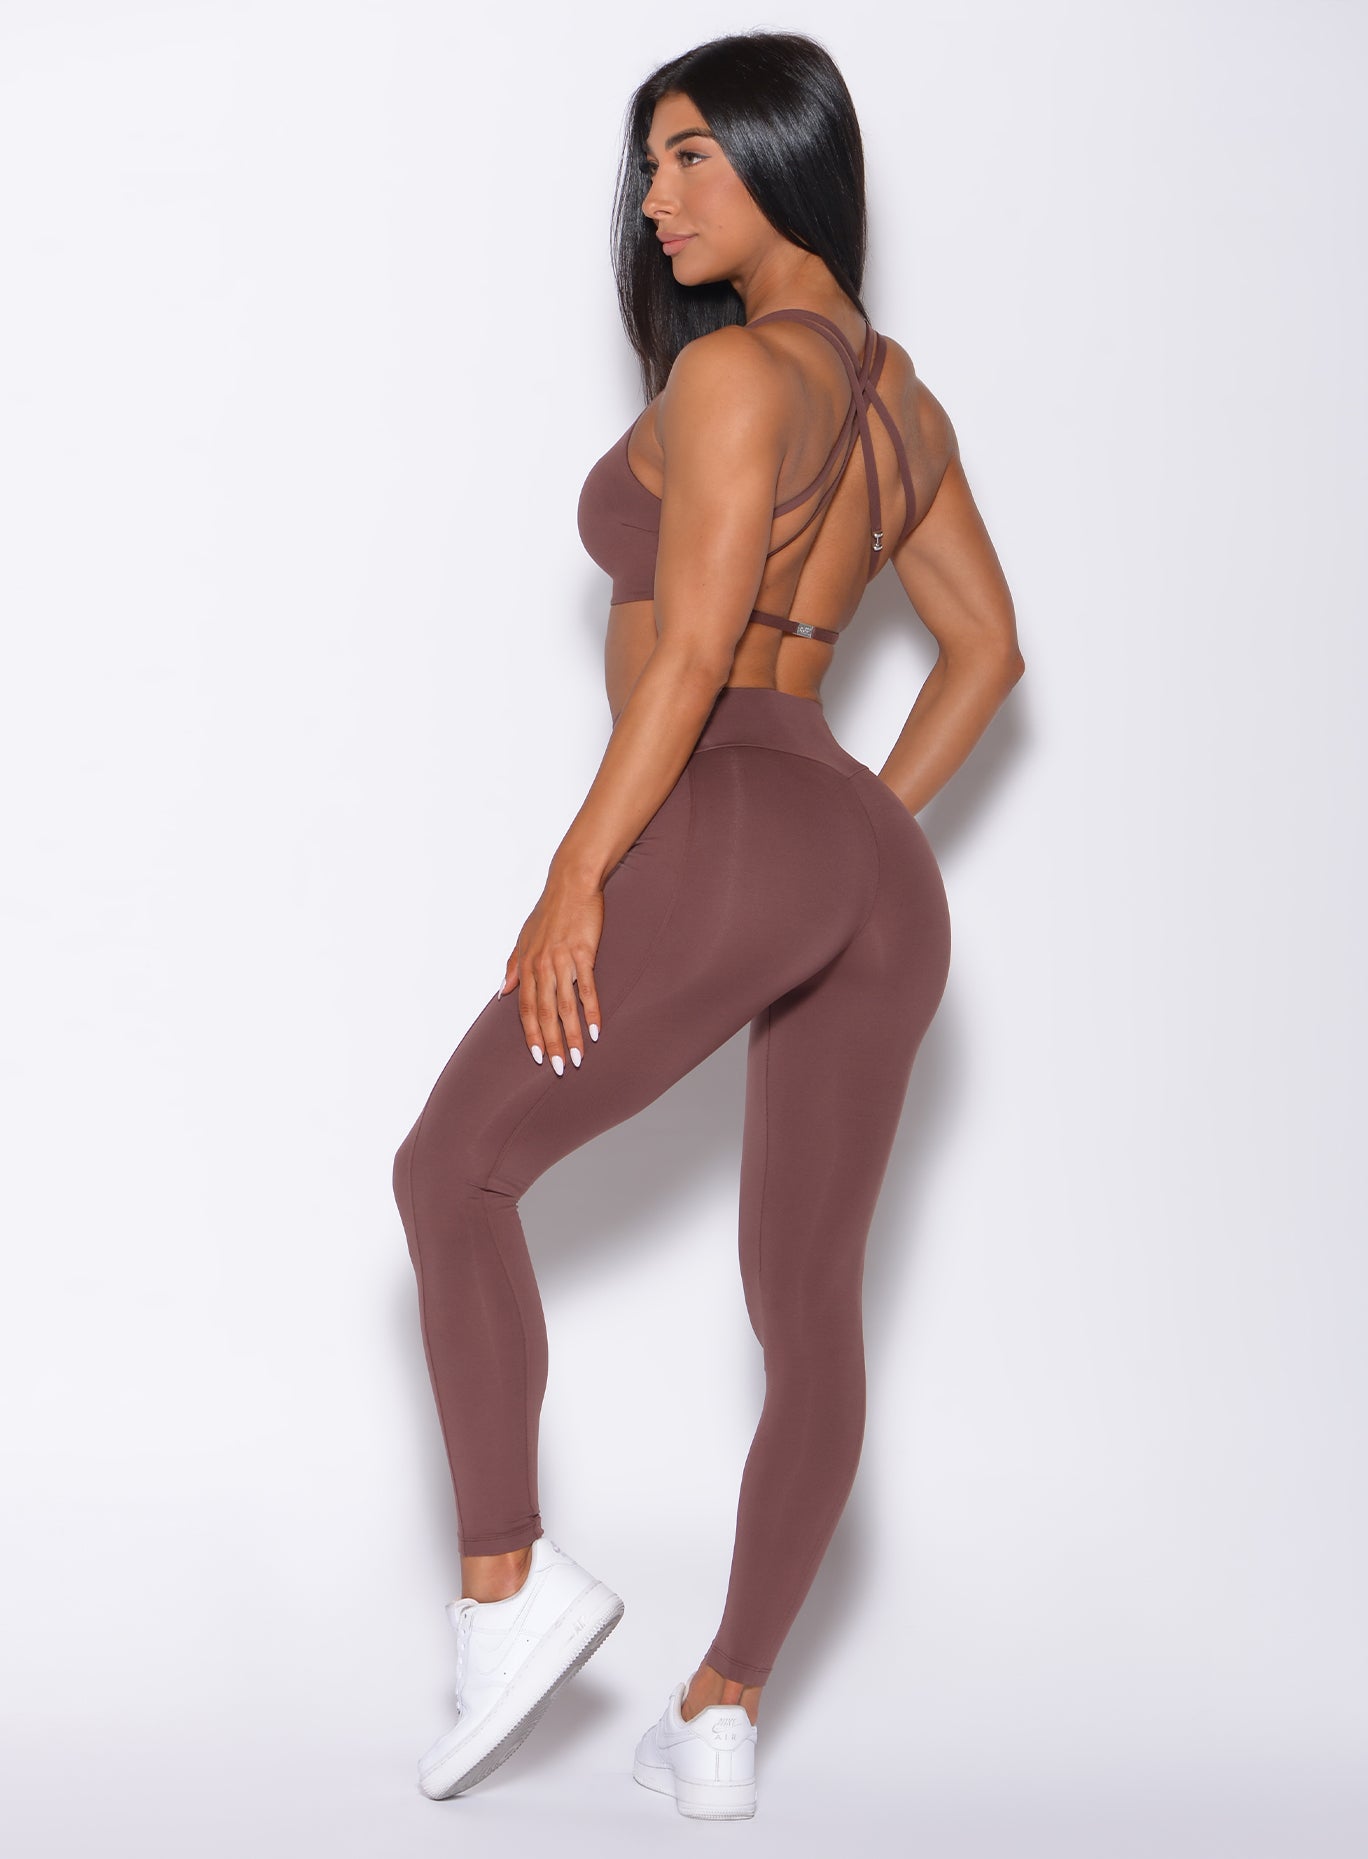 Left side profile view of a model in our barbell leggings in chocolate color and a matching bra